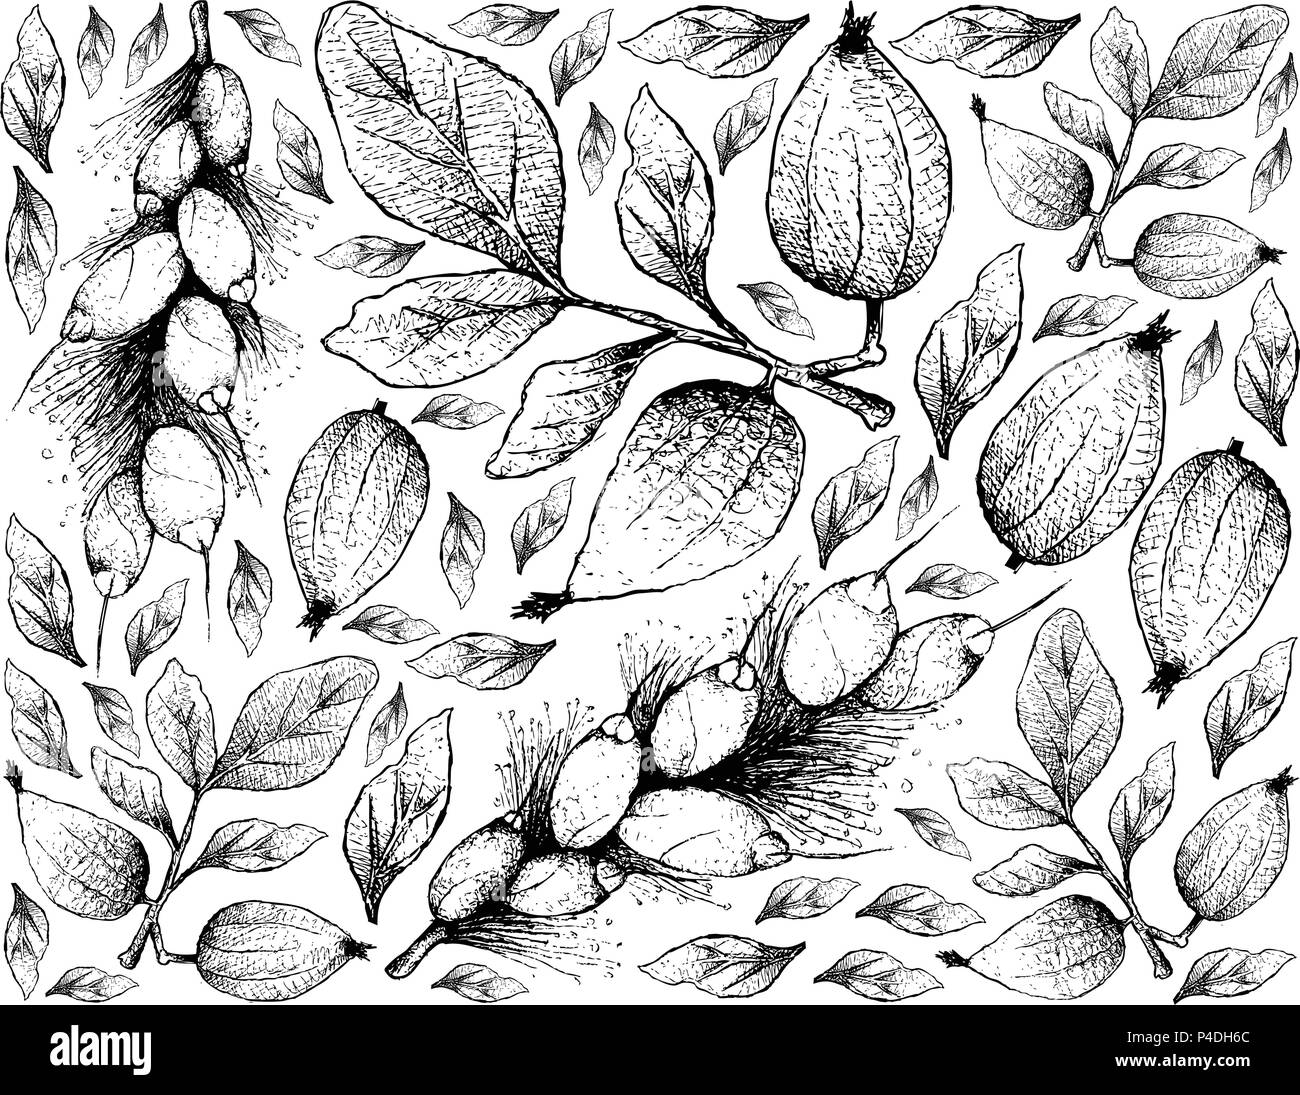 Tropical Fruit, Illustration Wallpaper of Hand Drawn Sketch Gardenia Erubescens and Barringtonia Edulis Fruits Isolated on White Background Stock Vector